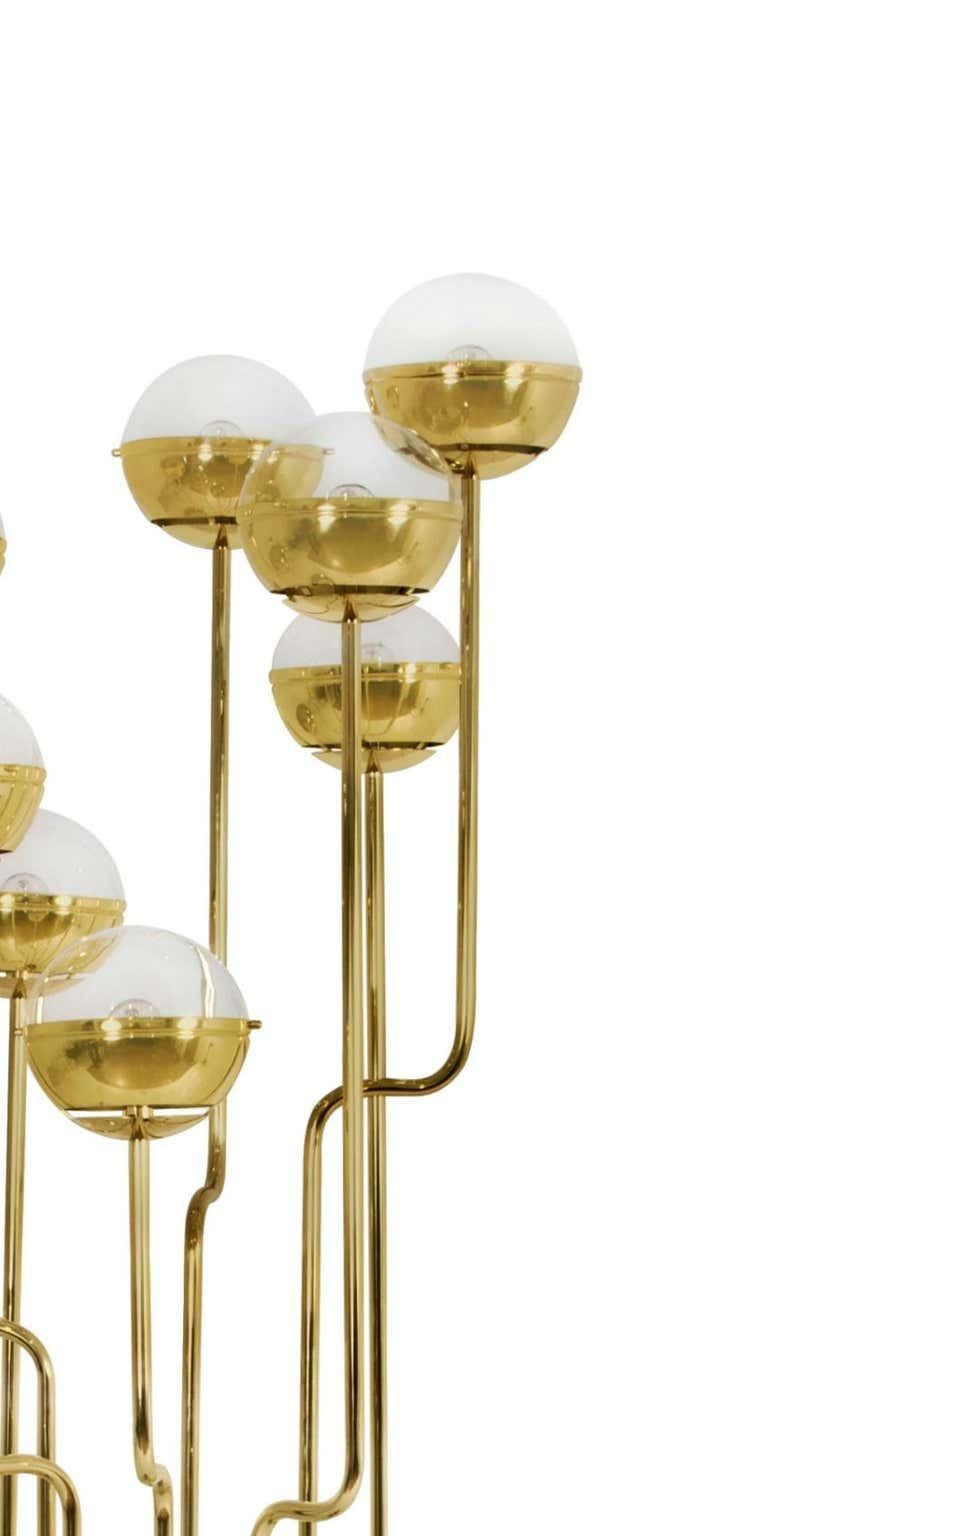 Floor lamp in gold-plated brass with black marble base

Custom sizes, materials and finishes.

Estimated production time: 8-9 weeks

Structure in gold plated brass, shaders in gold plated brass and glass, base: black